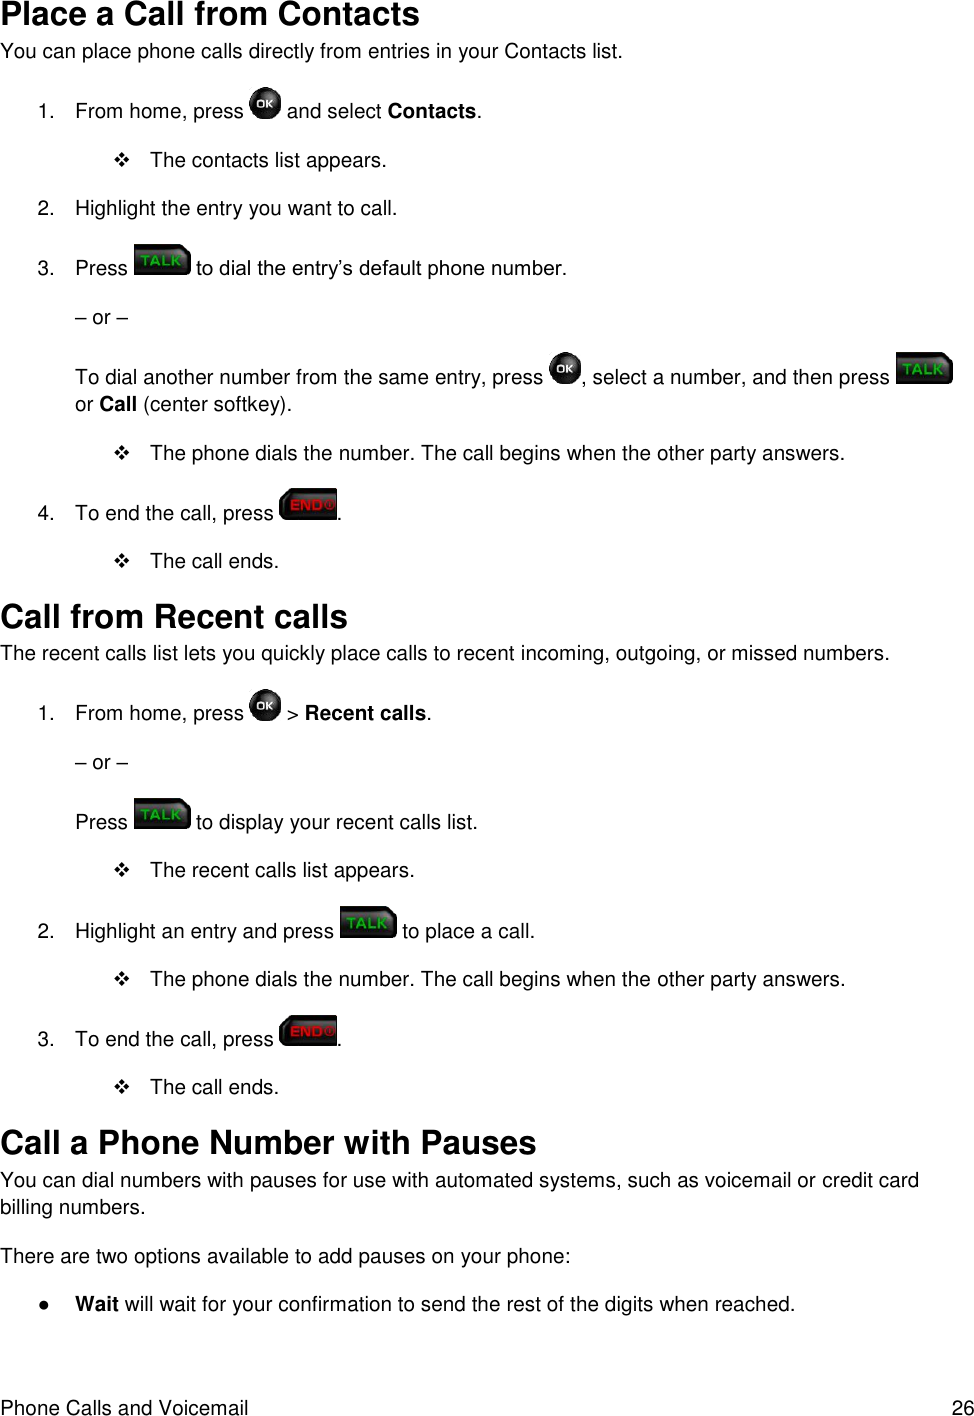 Phone Calls and Voicemail  26 Place a Call from Contacts You can place phone calls directly from entries in your Contacts list. 1.  From home, press   and select Contacts.    The contacts list appears. 2.  Highlight the entry you want to call. 3.  Press   to dial the entry’s default phone number. – or – To dial another number from the same entry, press  , select a number, and then press   or Call (center softkey).   The phone dials the number. The call begins when the other party answers. 4.  To end the call, press  .    The call ends. Call from Recent calls  The recent calls list lets you quickly place calls to recent incoming, outgoing, or missed numbers. 1.  From home, press   &gt; Recent calls. – or – Press   to display your recent calls list.   The recent calls list appears. 2.  Highlight an entry and press   to place a call.   The phone dials the number. The call begins when the other party answers. 3.  To end the call, press  .    The call ends. Call a Phone Number with Pauses You can dial numbers with pauses for use with automated systems, such as voicemail or credit card billing numbers. There are two options available to add pauses on your phone: ● Wait will wait for your confirmation to send the rest of the digits when reached. 